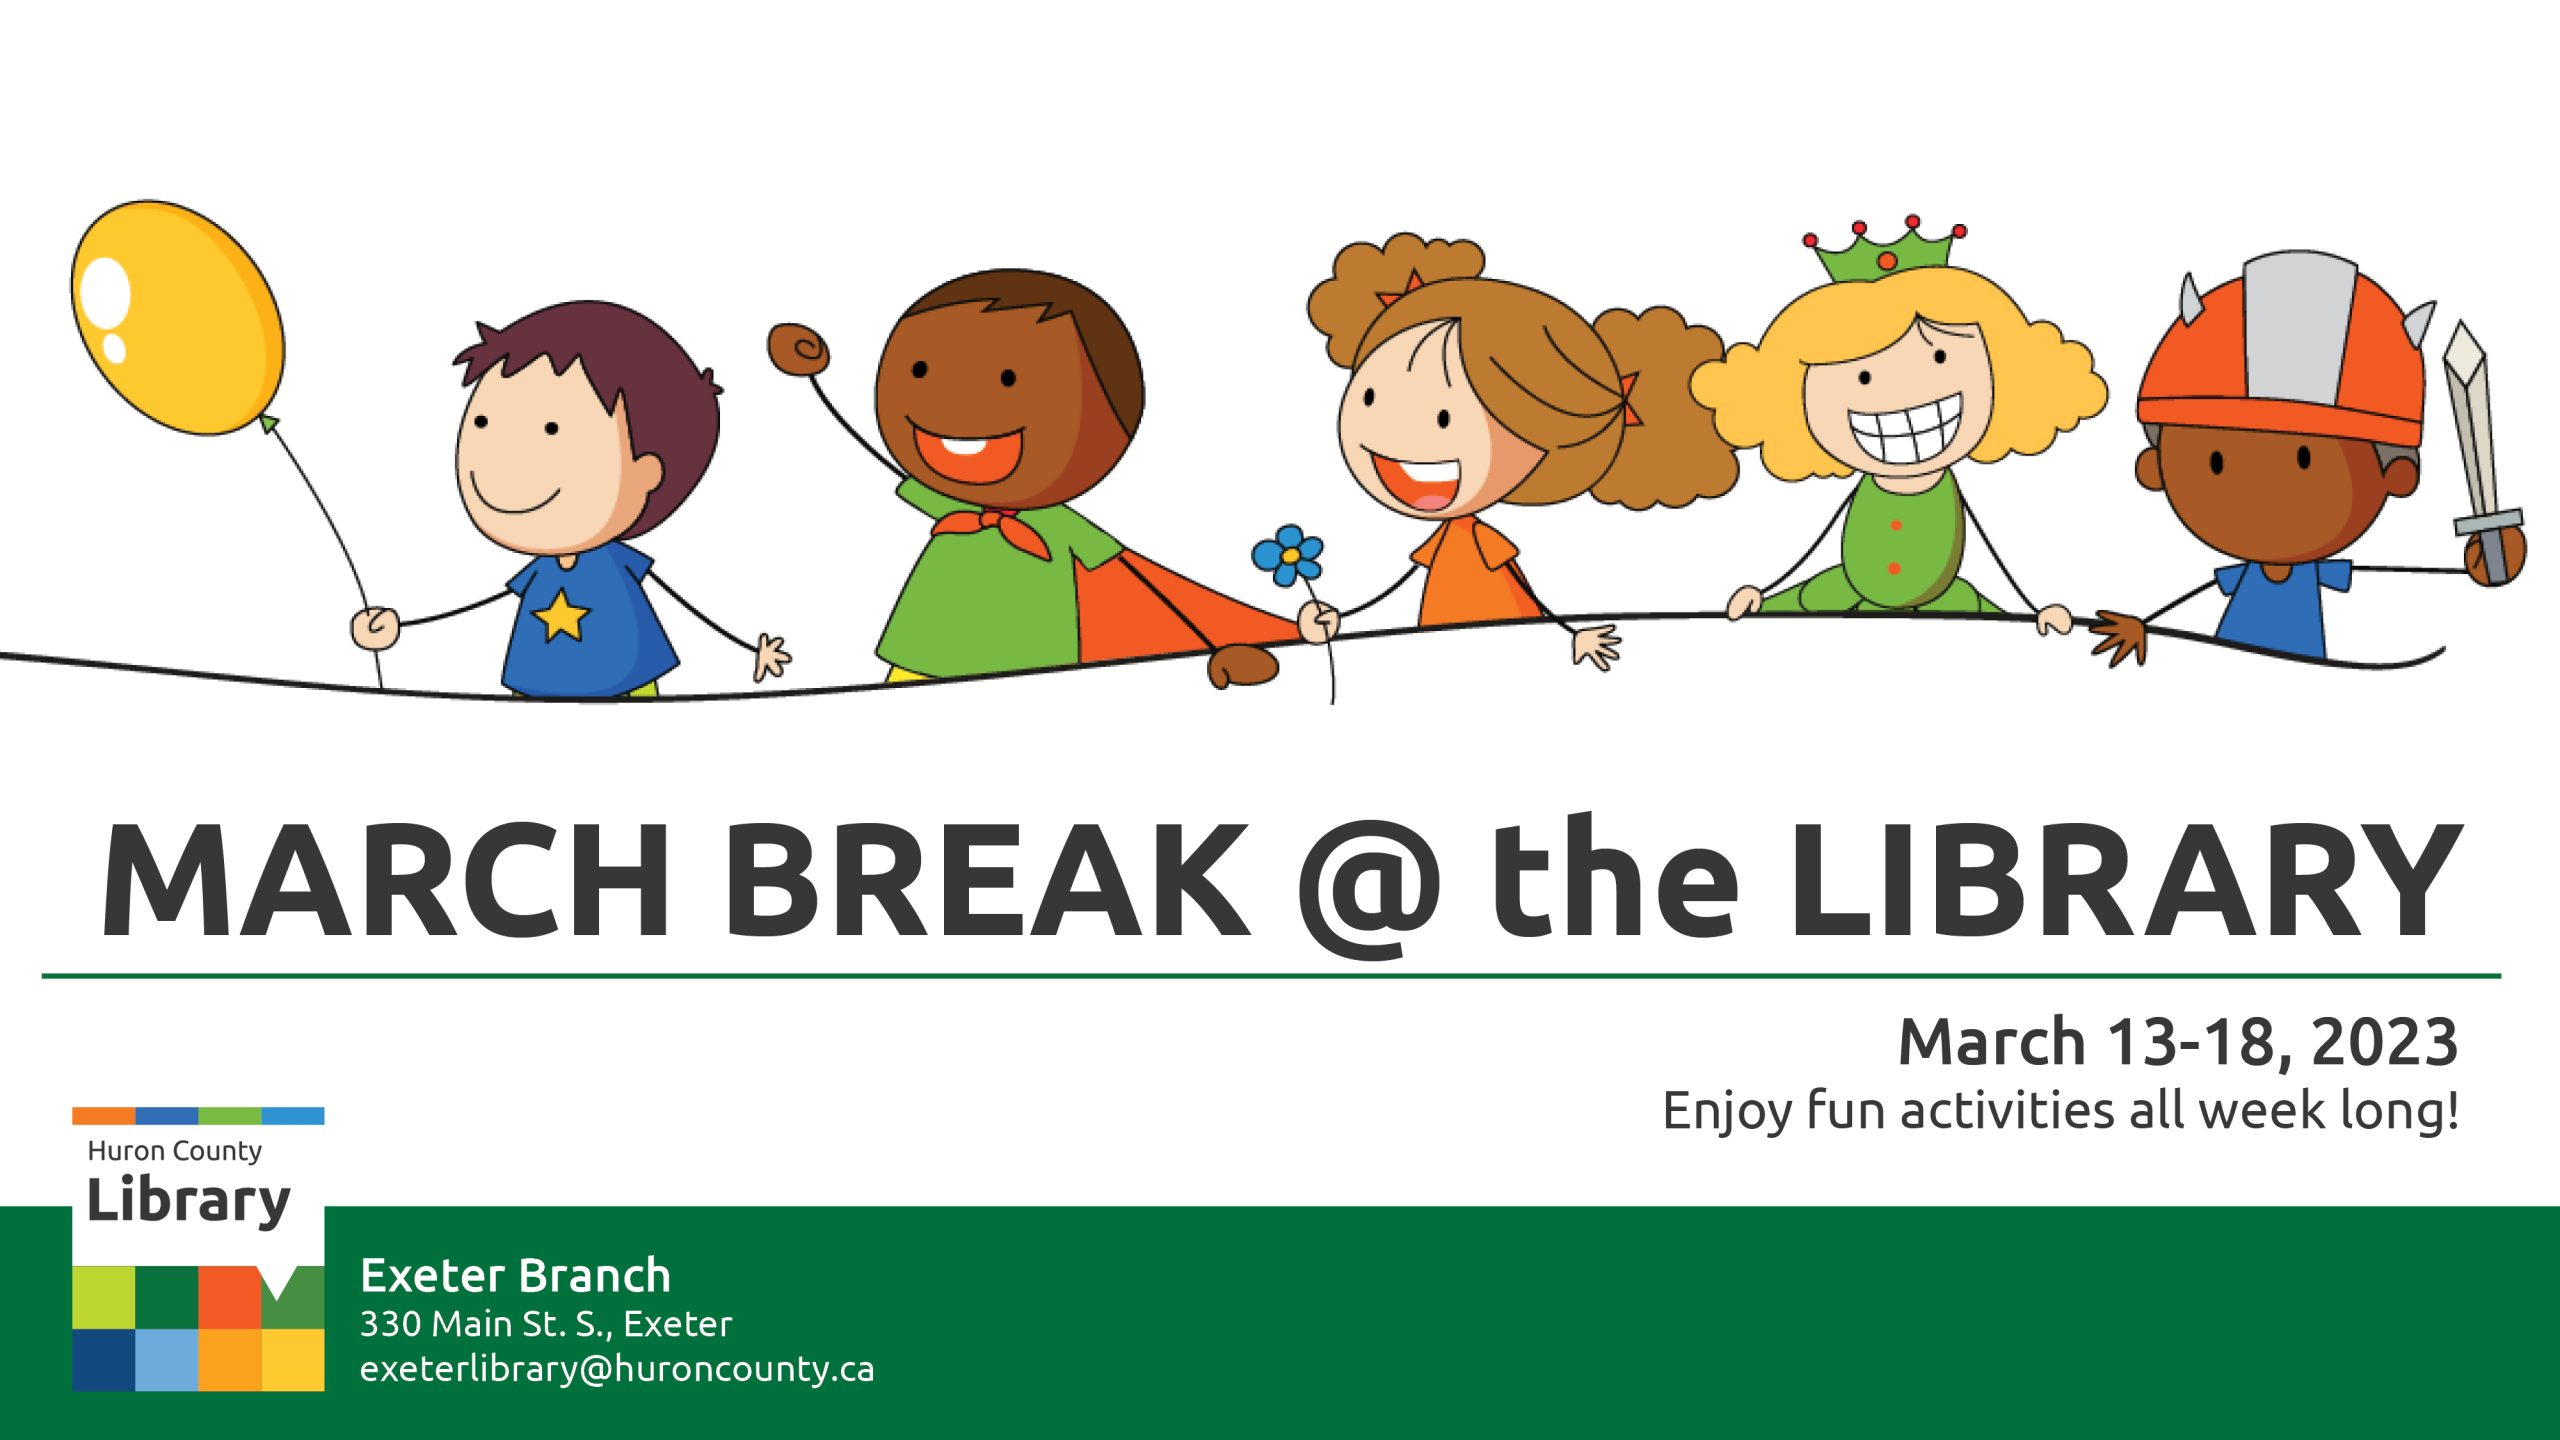 Illustration of 5 kids having fun with text promoting March Break at Exeter Branch